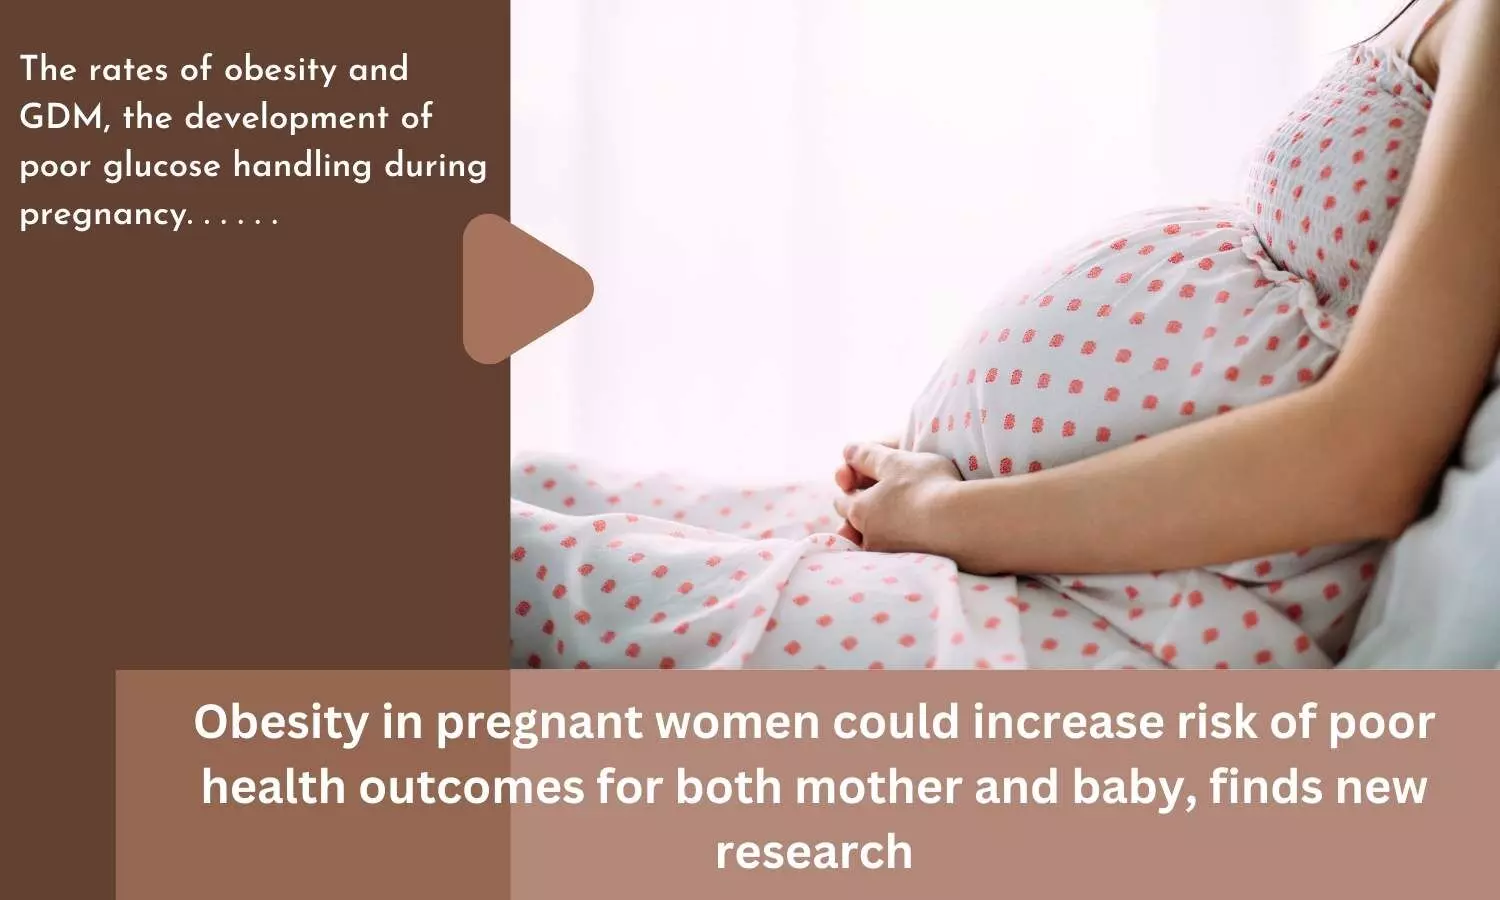 Obesity in pregnant women could increase risk of poor health outcomes for both mother and baby, finds new research